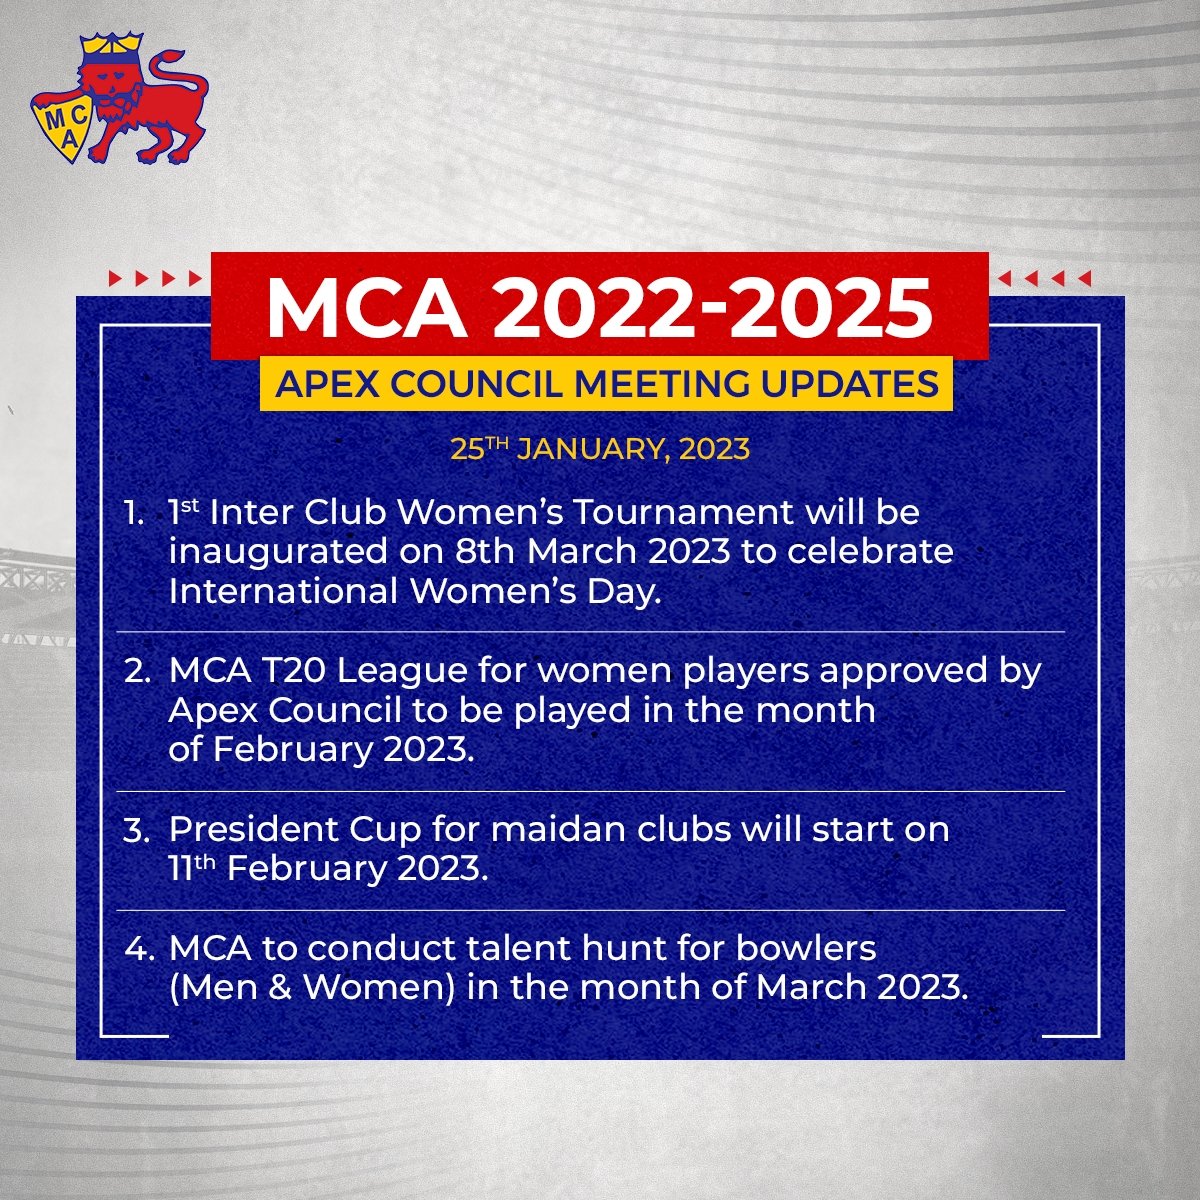 The below points were discussed and decided upon at the Apex Council Meeting held on 25th January 2023 🙌 Some exciting times ahead for Mumbai Cricket ⏩ 🔥 #MCA #Mumbai #Cricket #IndianCricket #Wankhede #BCCI